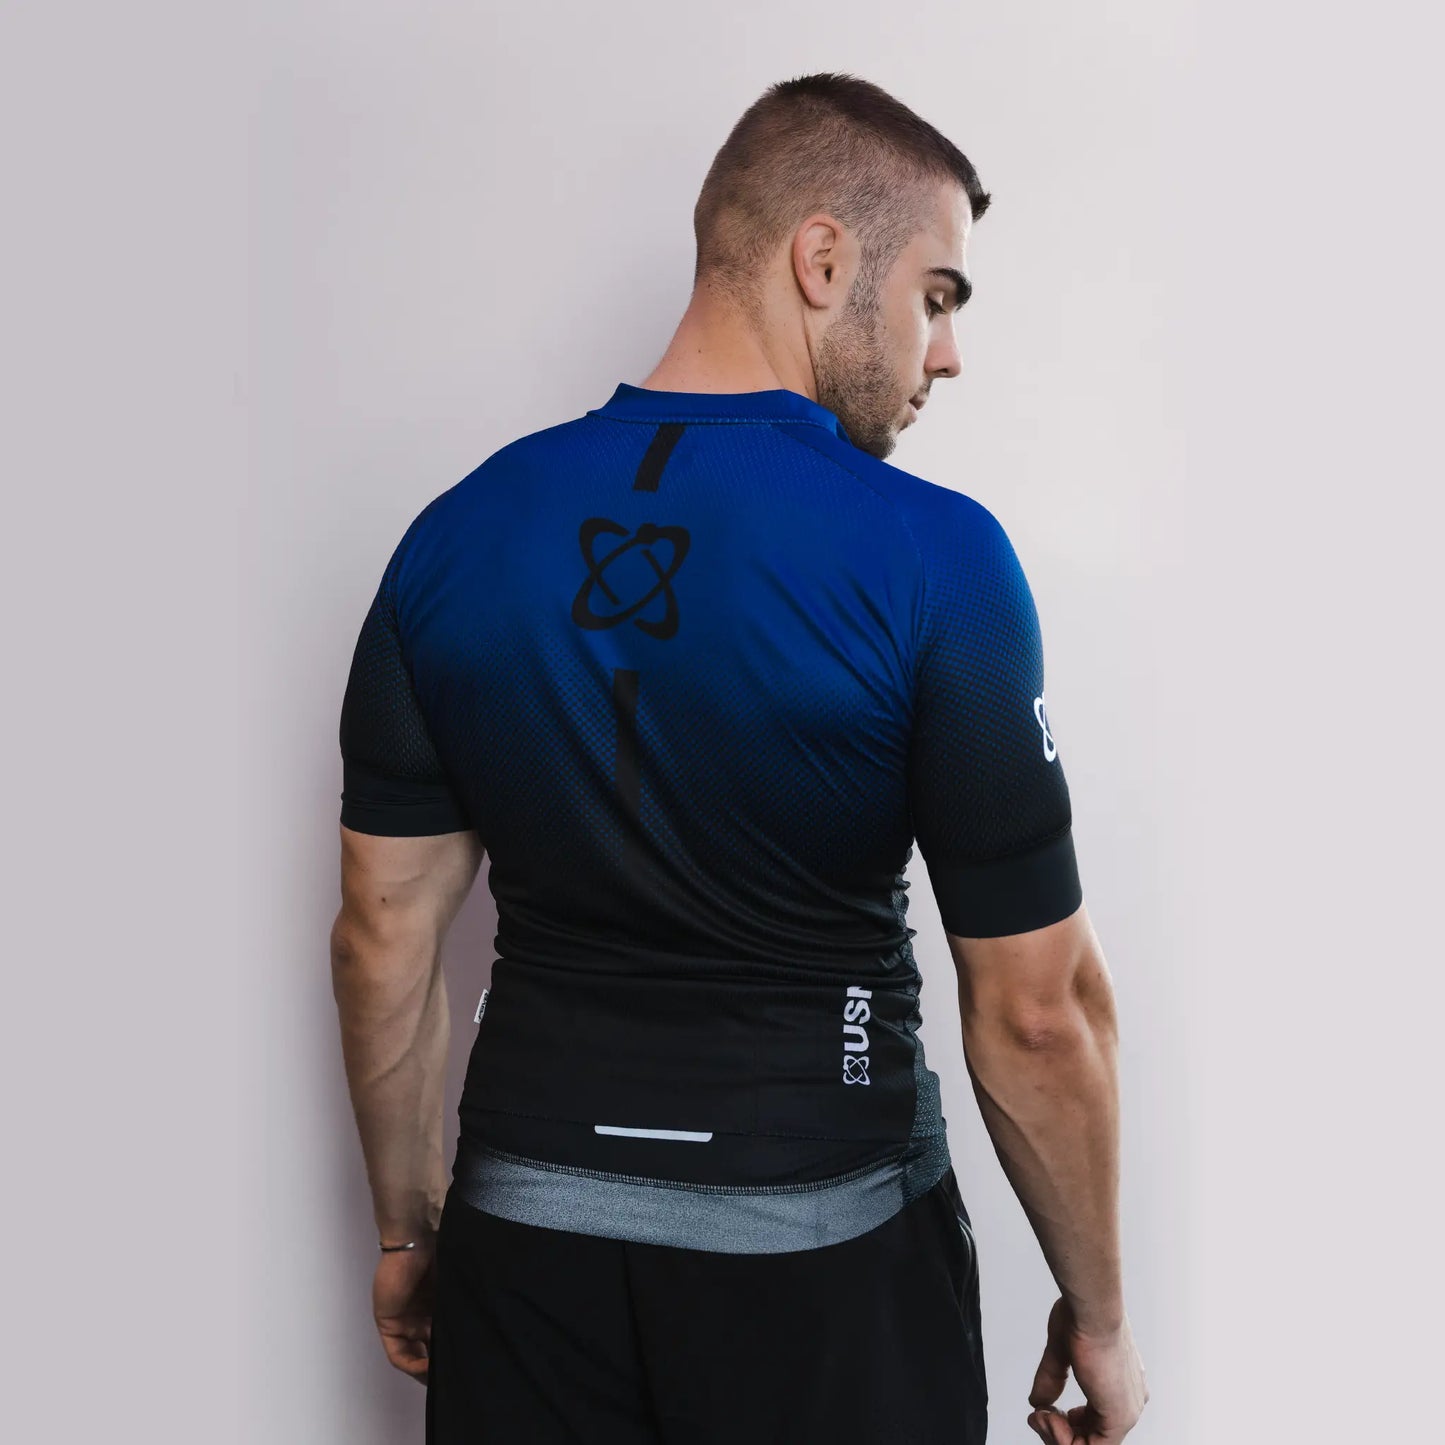 USN Cycling Shirt with model 2